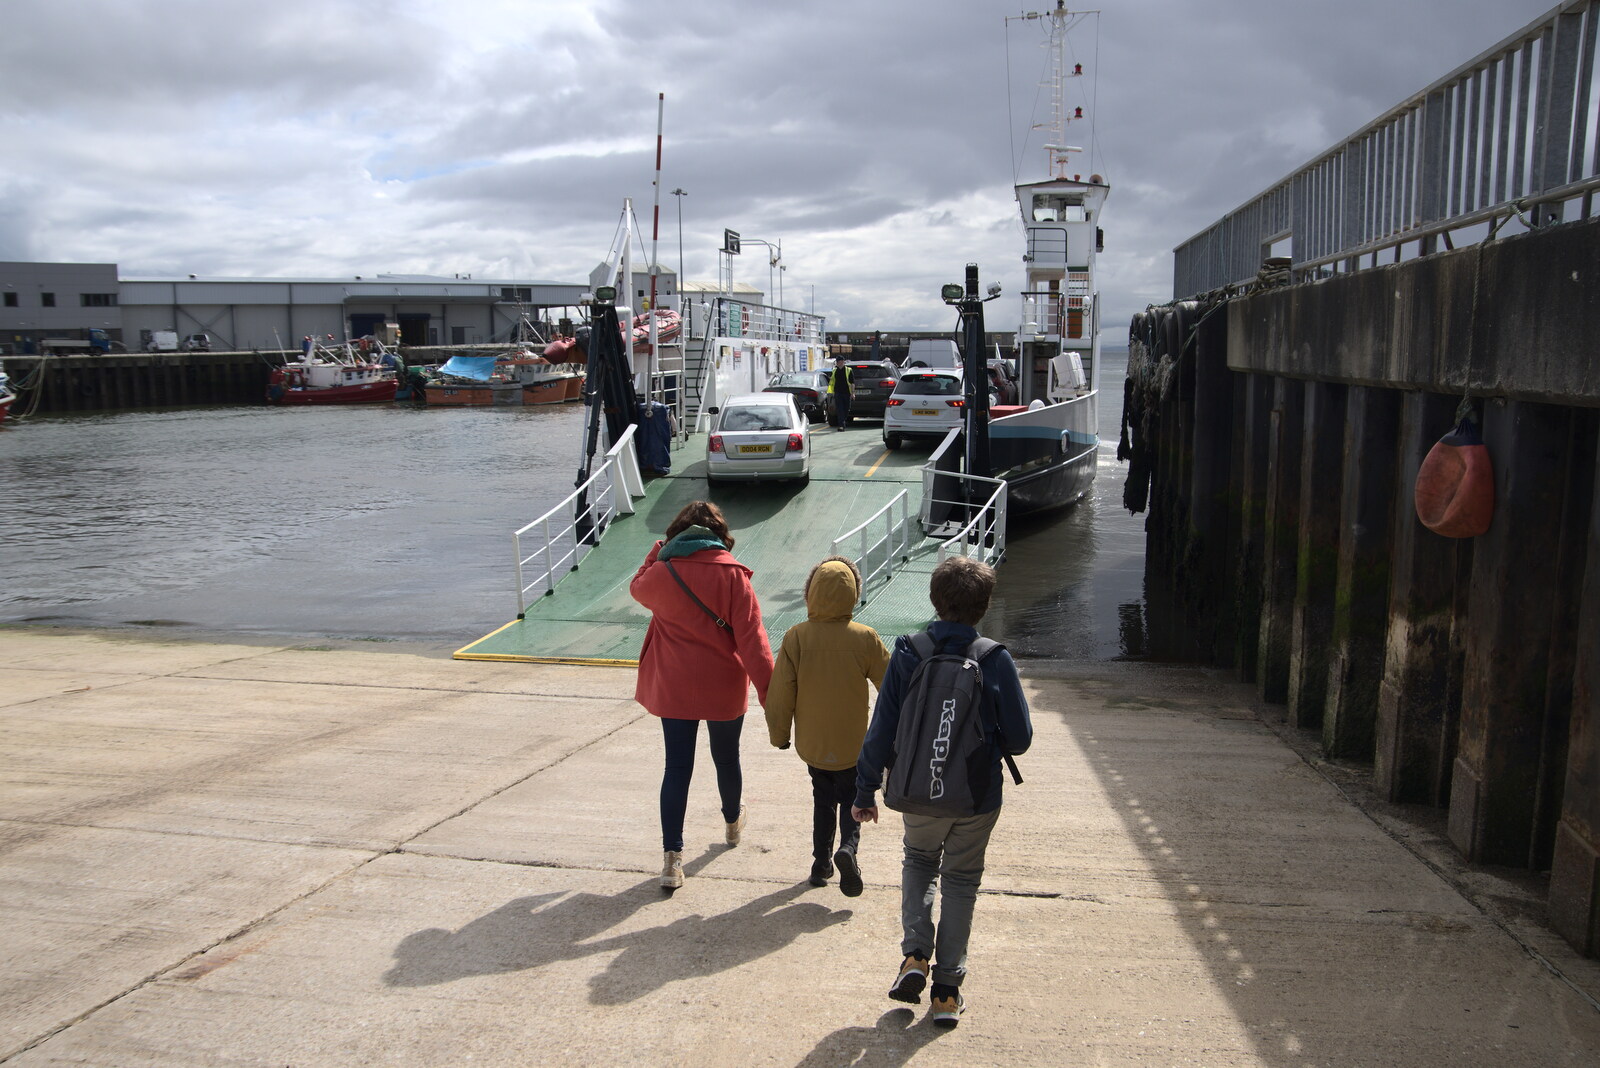 Greencastle, Doagh and Malin Head, County Donegal, Ireland - 19th April 2022: We walk on to the Foyle Ferry